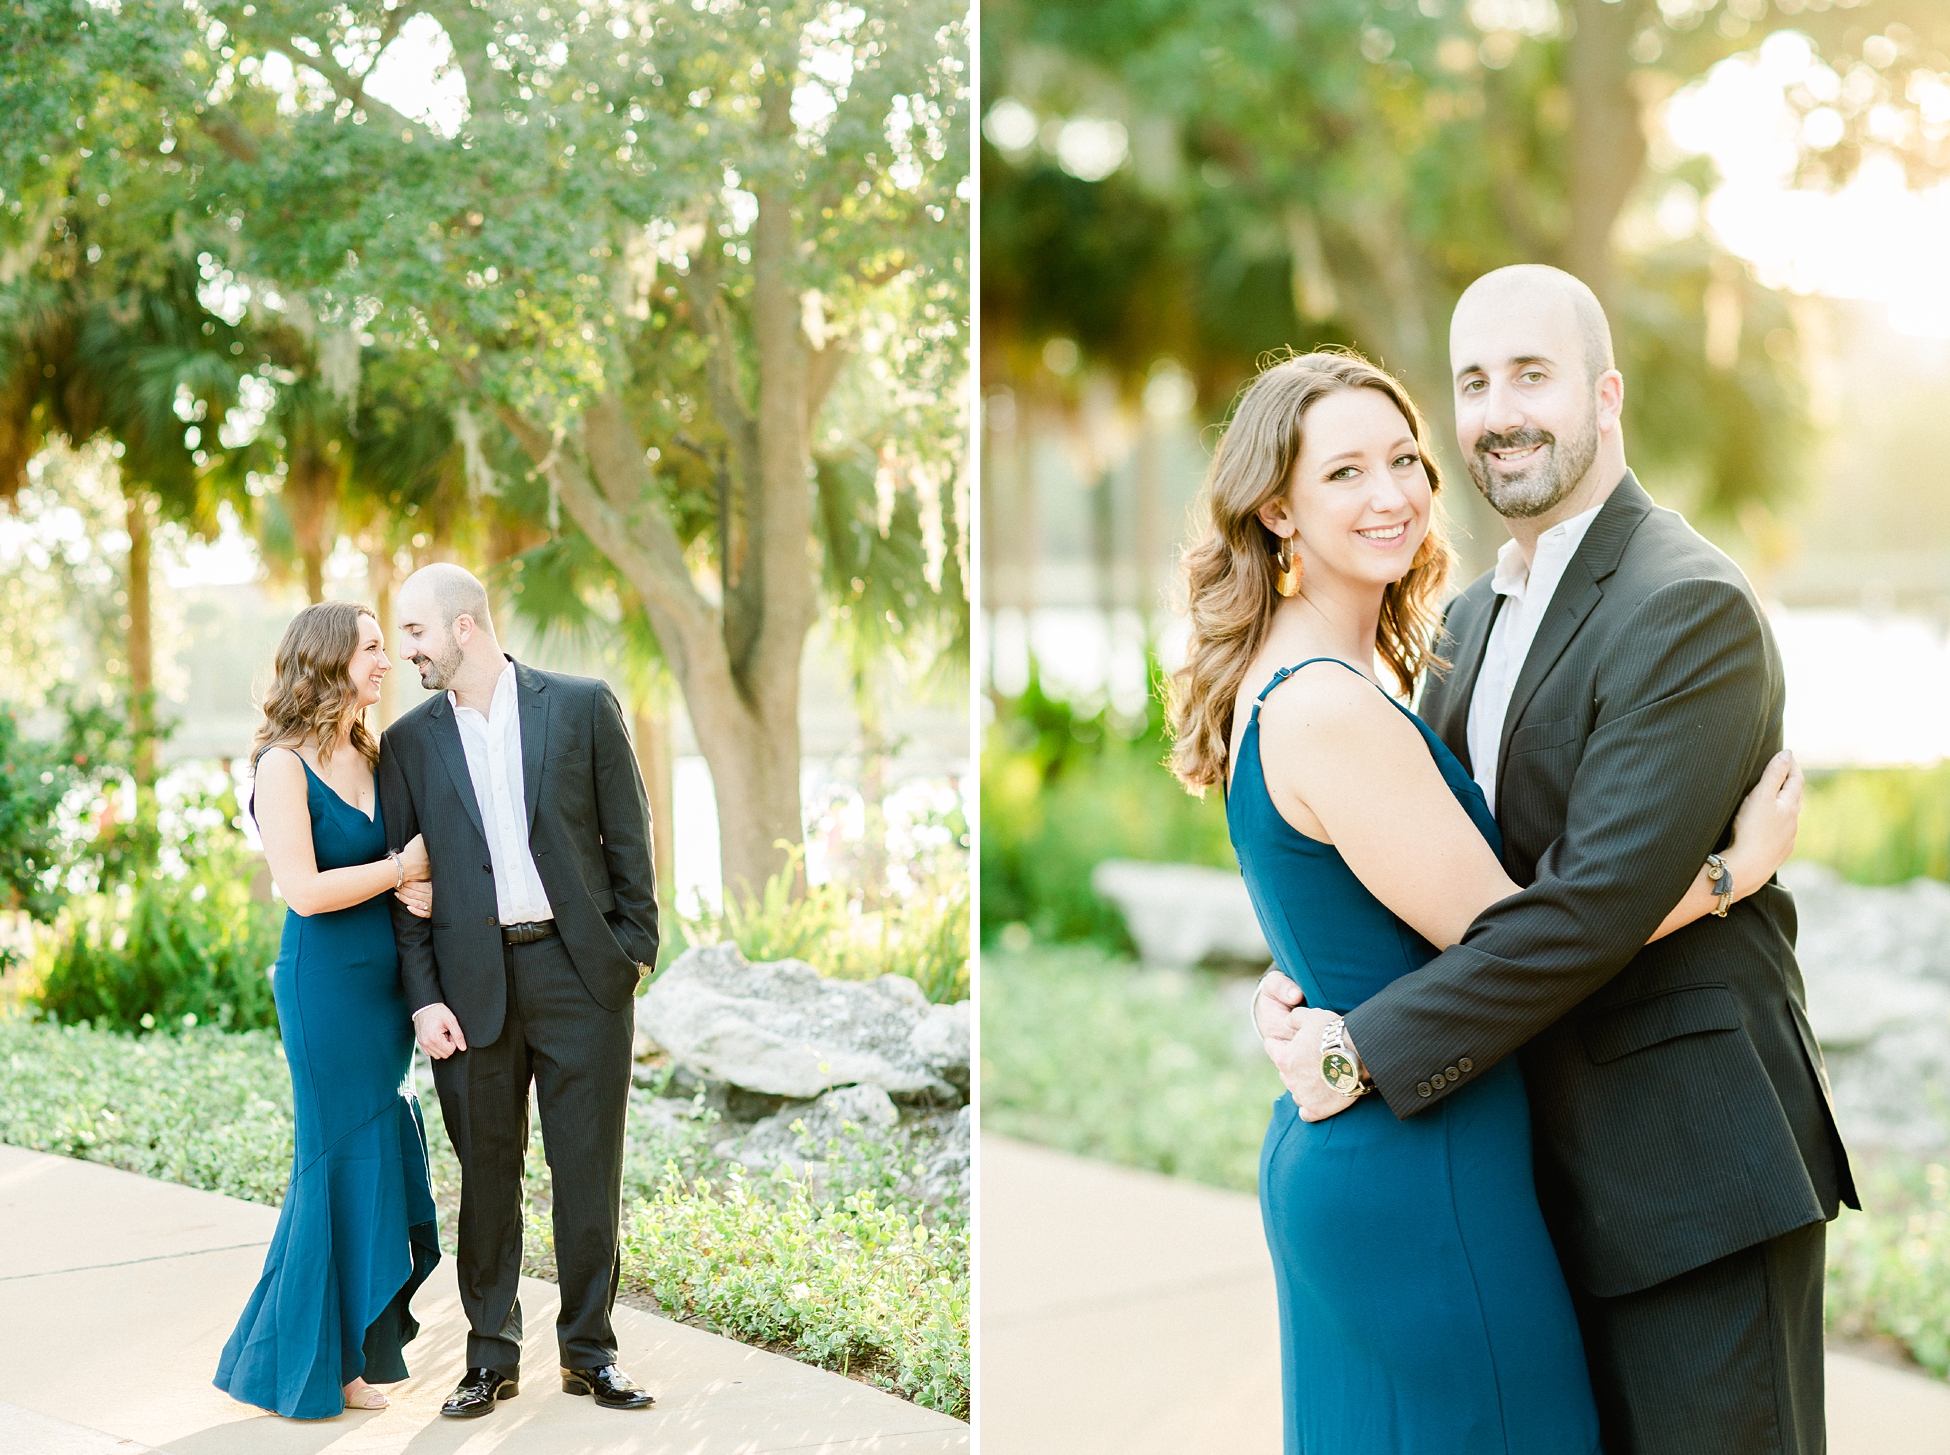 Downtown Tampa Engagement |© Ailyn La Torre Photography 2018